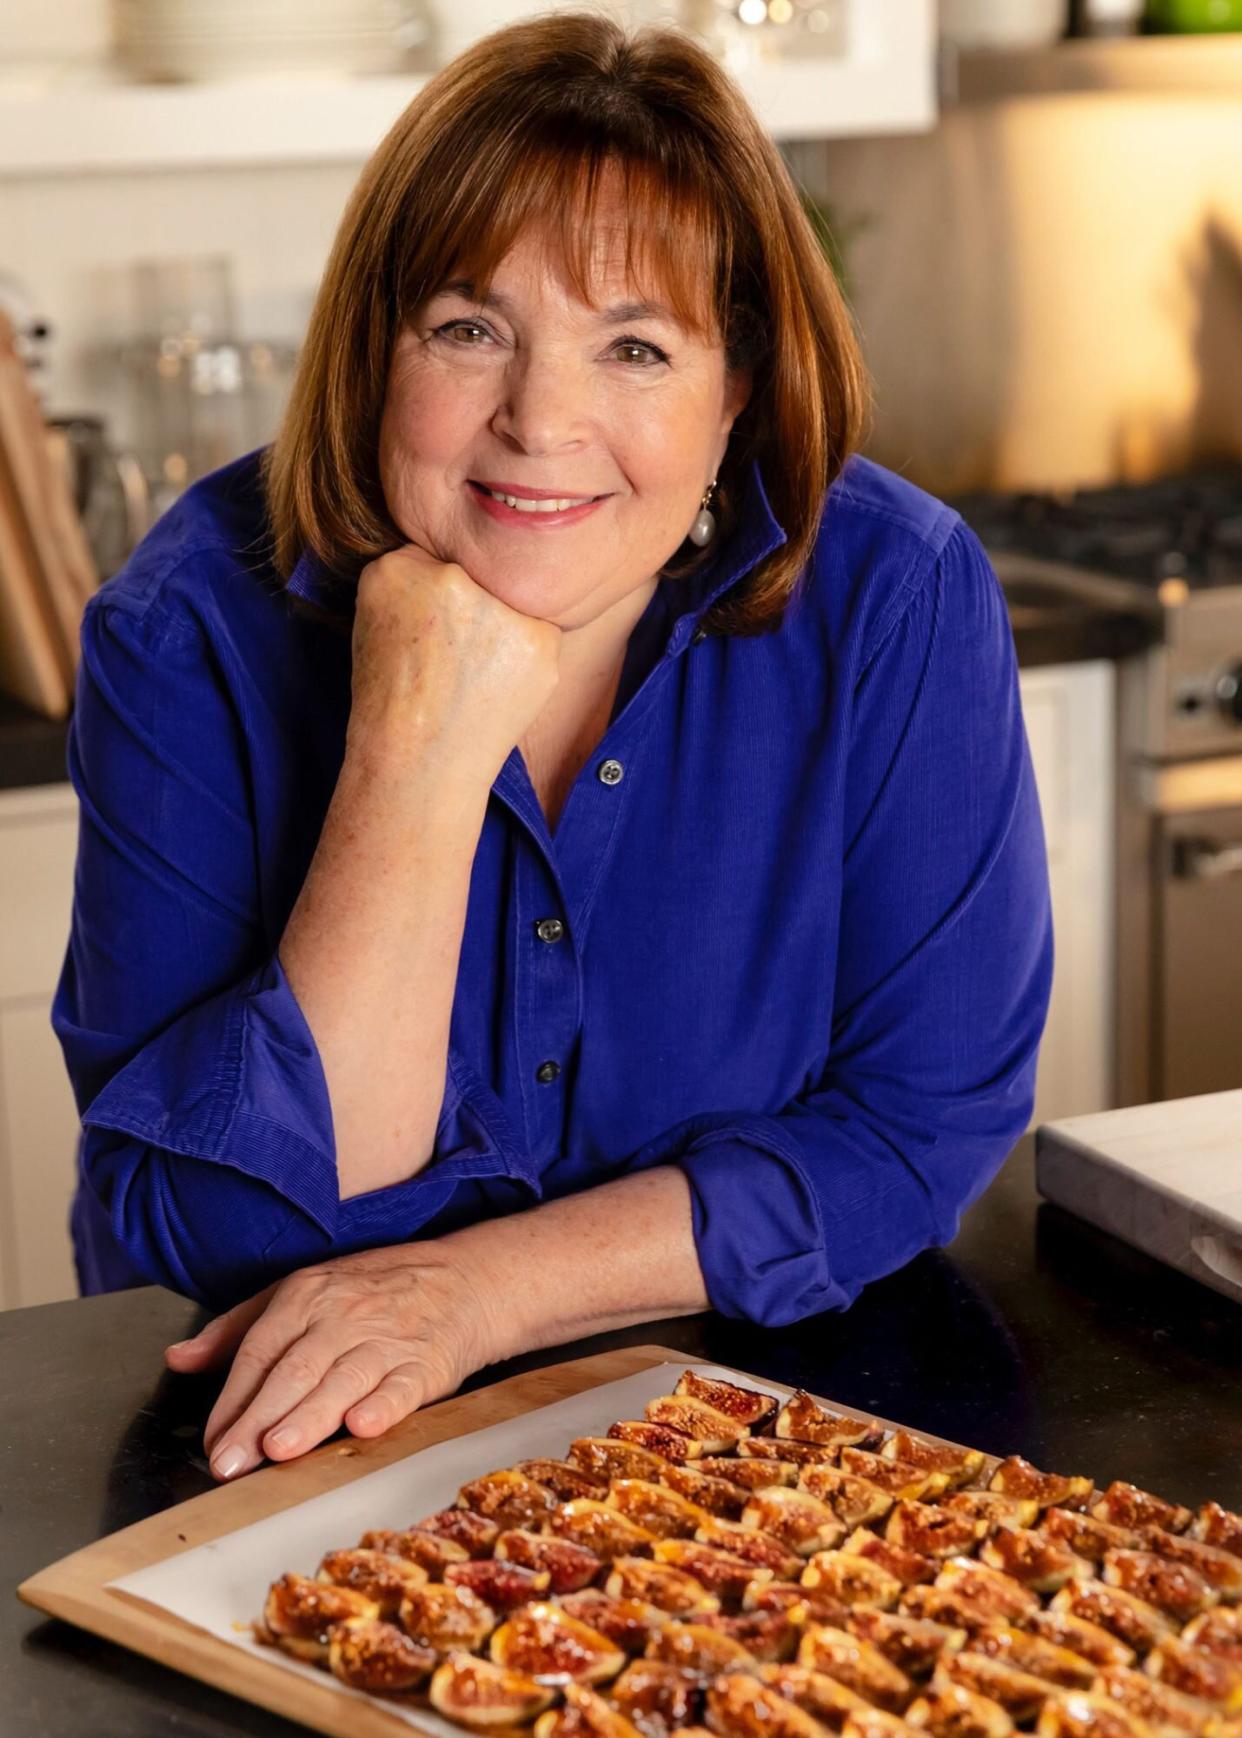 Ina Garten's Freshly Baked Desserts Can Be Shipped to Your Door, Thanks to Goldbelly